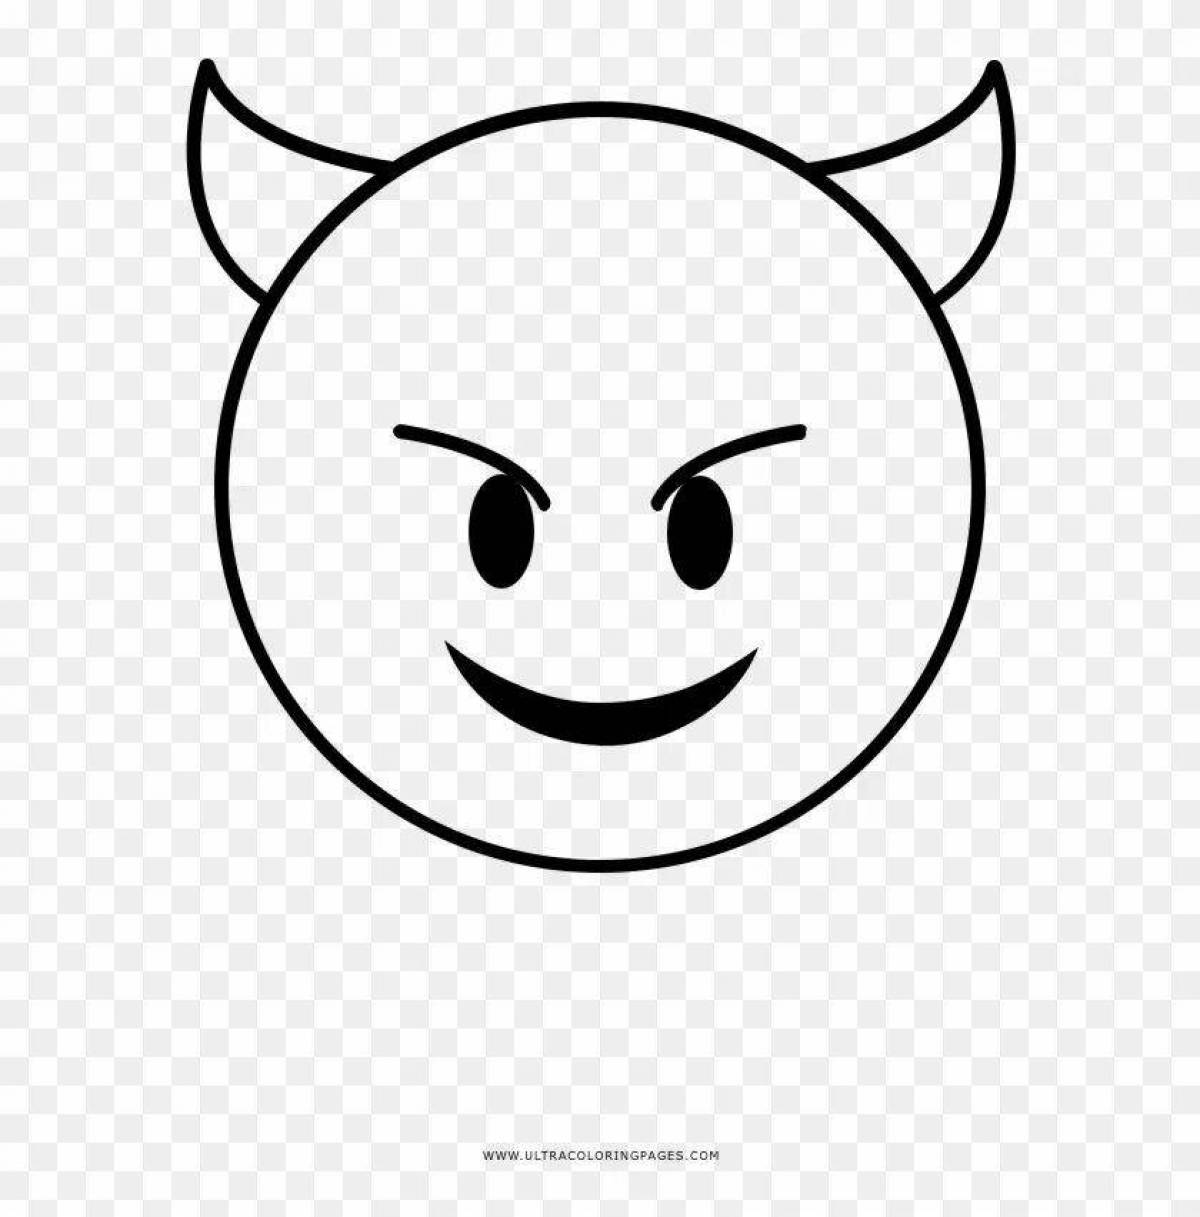 Angry emoticon moody coloring page